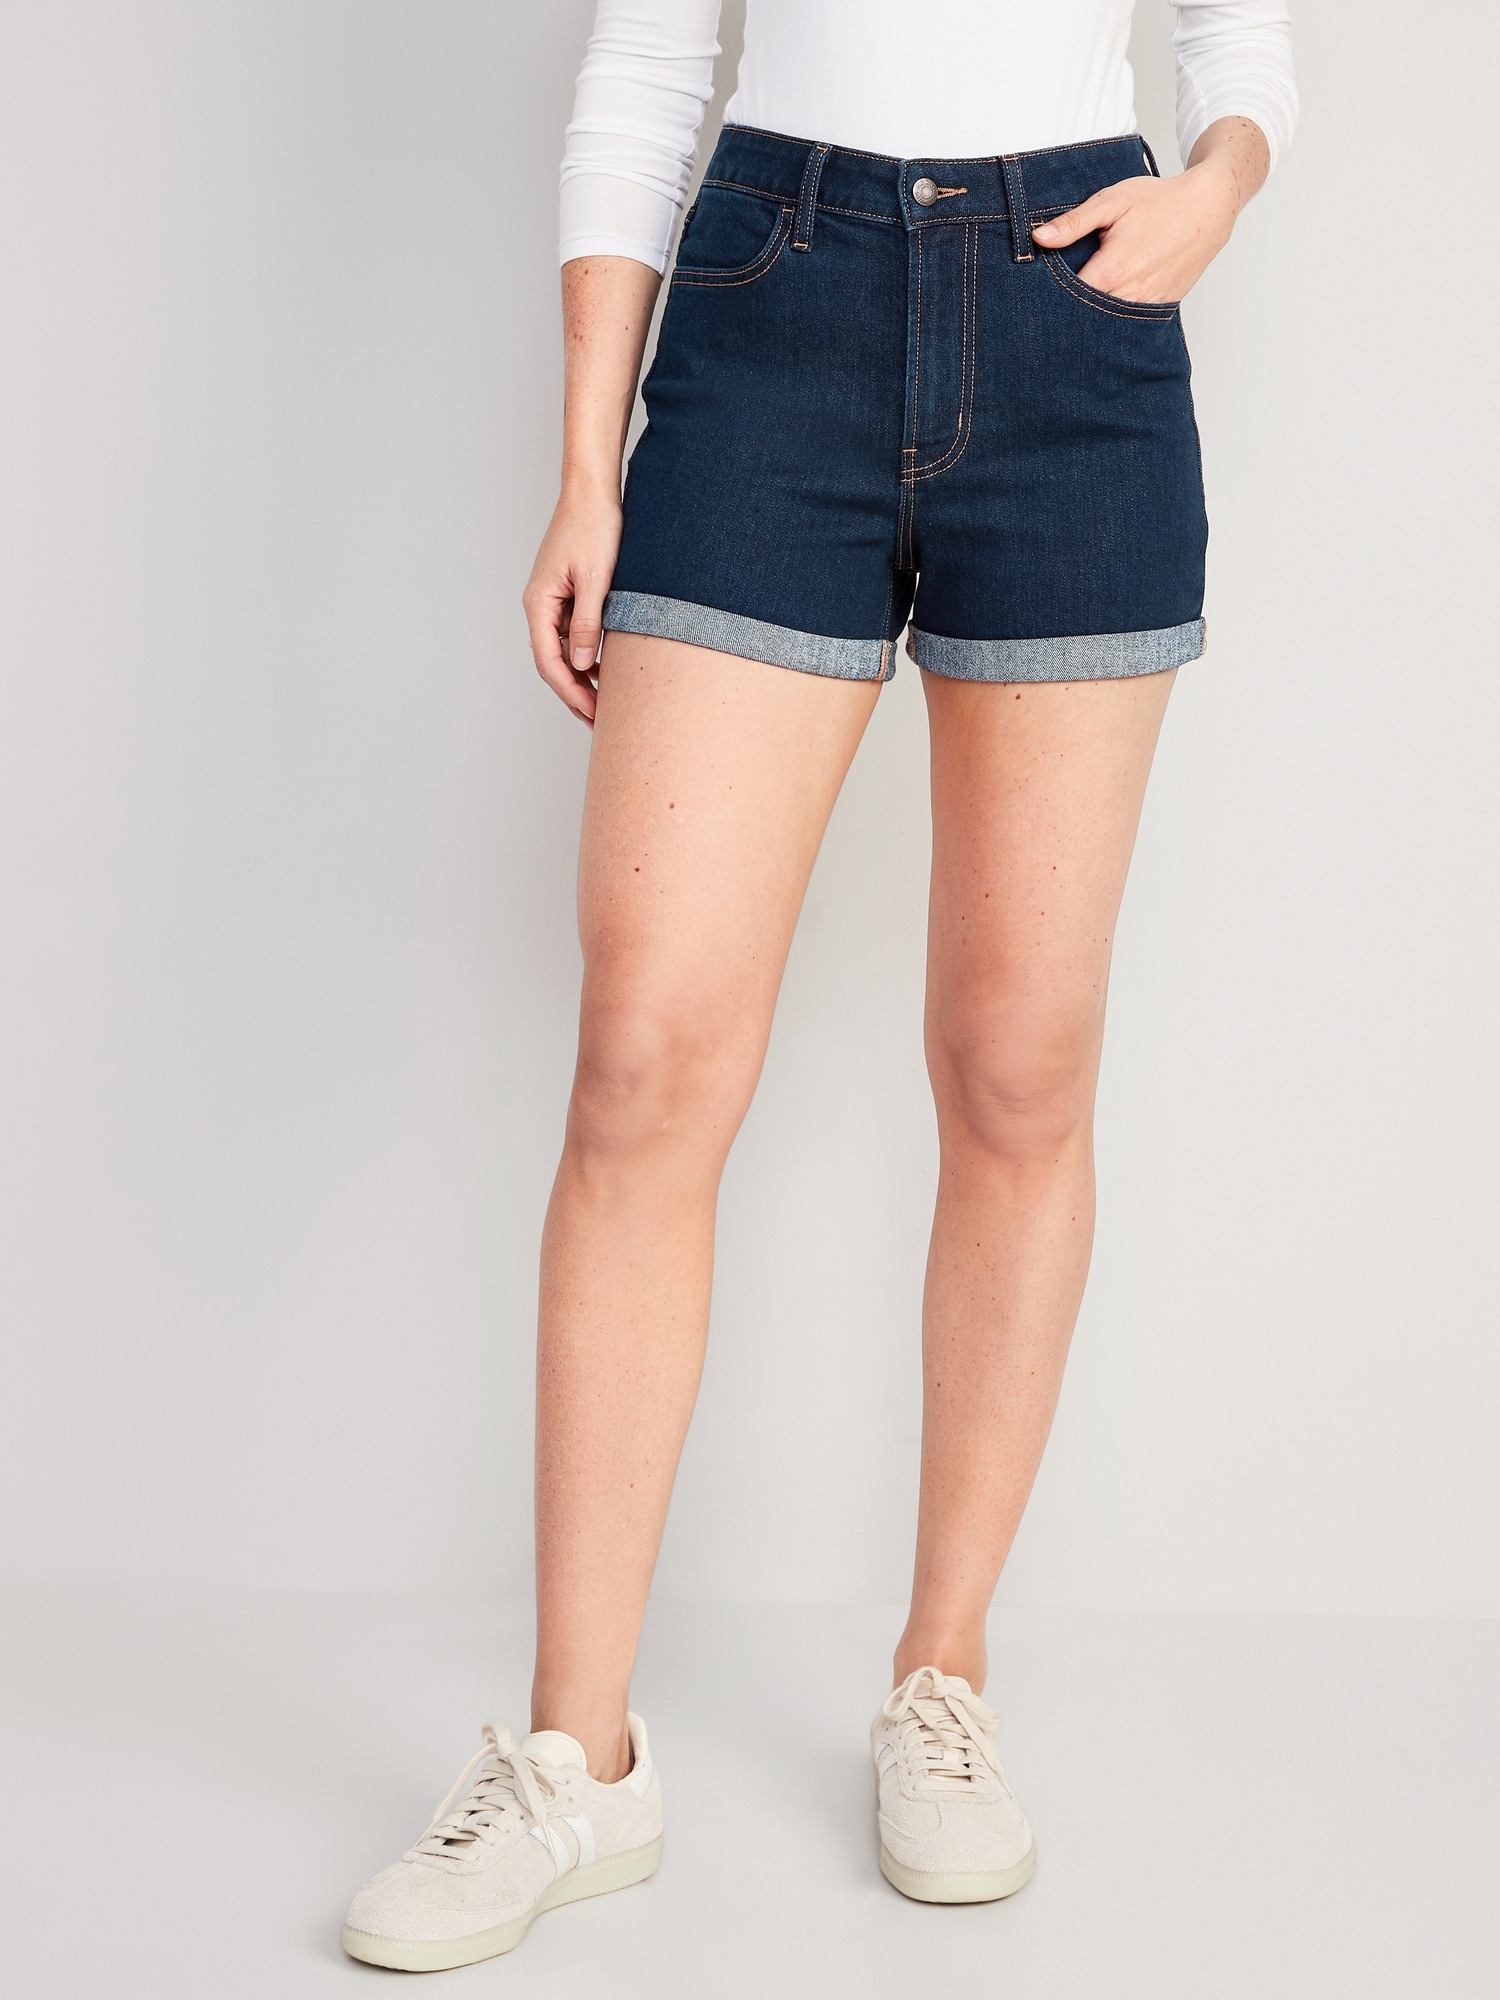 High Waisted Rio Shorts (7 in. inseam) - Navy